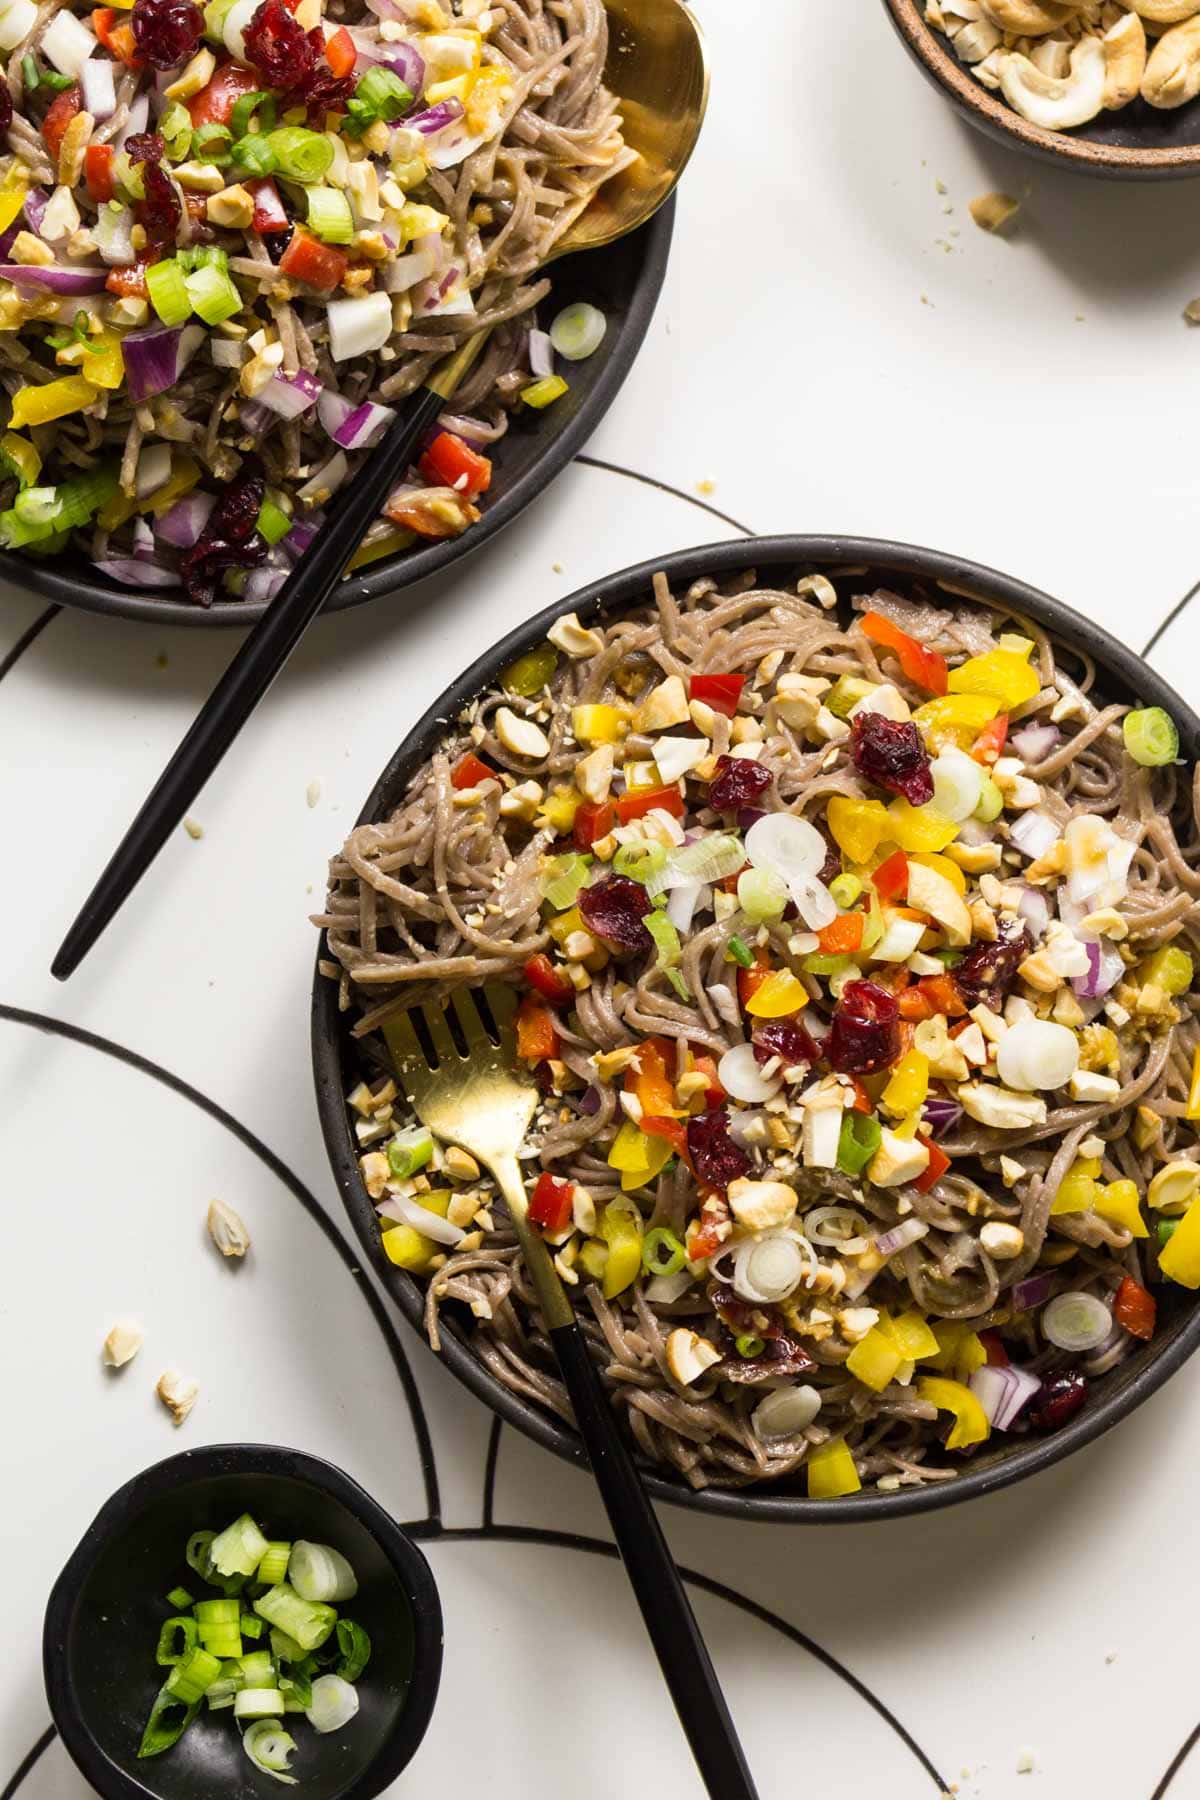 Soba noodle salad topped with veggies on plates